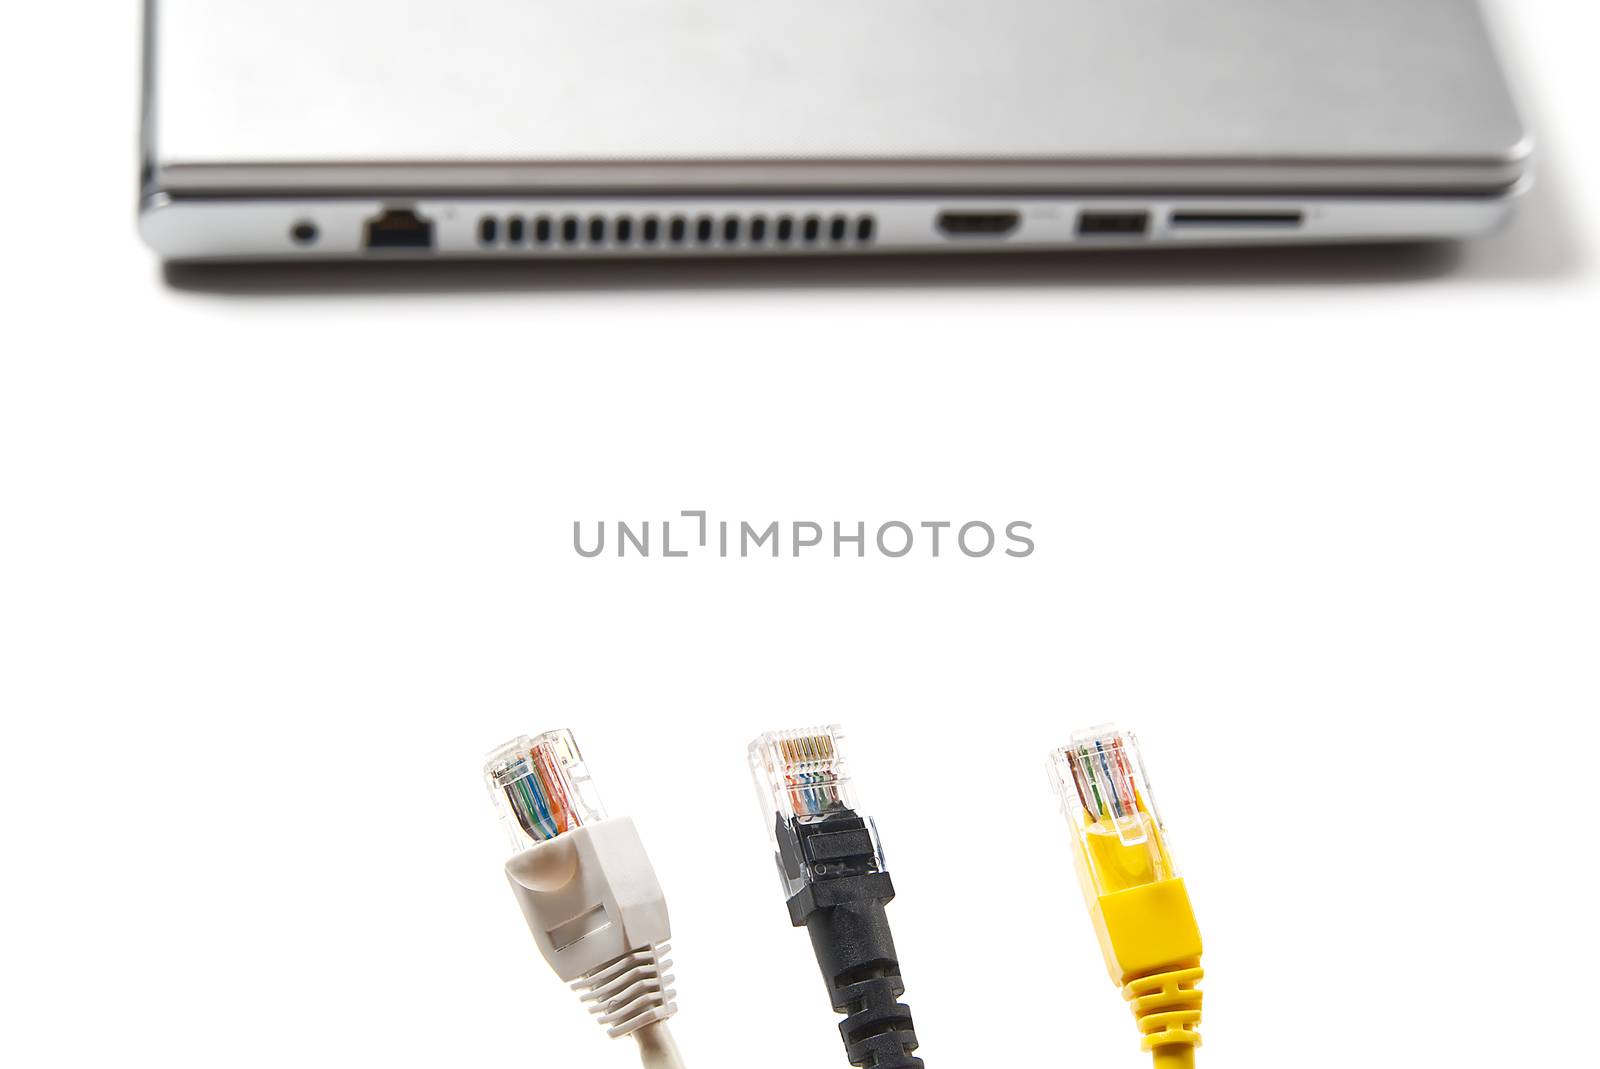 The choice of high-speed Internet access. The concept of connecting broadband high-speed Internet to every home. by PhotoTime